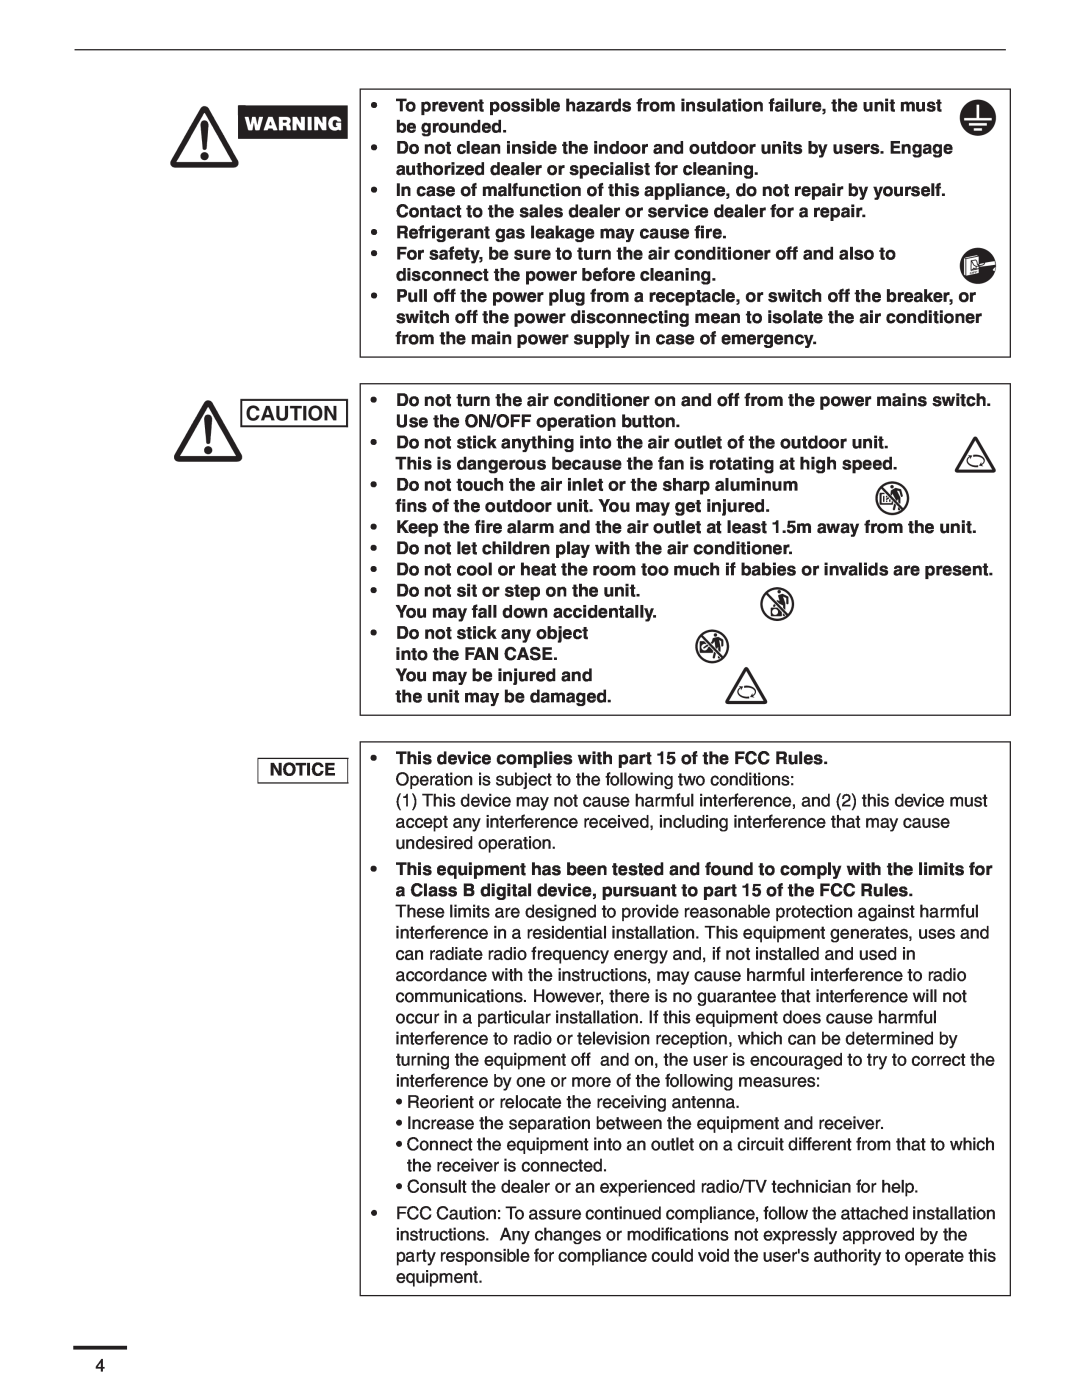 Panasonic CS-MKS12NKU, CS-MKS9NKU, CS-MKS7NKU appendix Refrigerant gas leakage may cause fire 